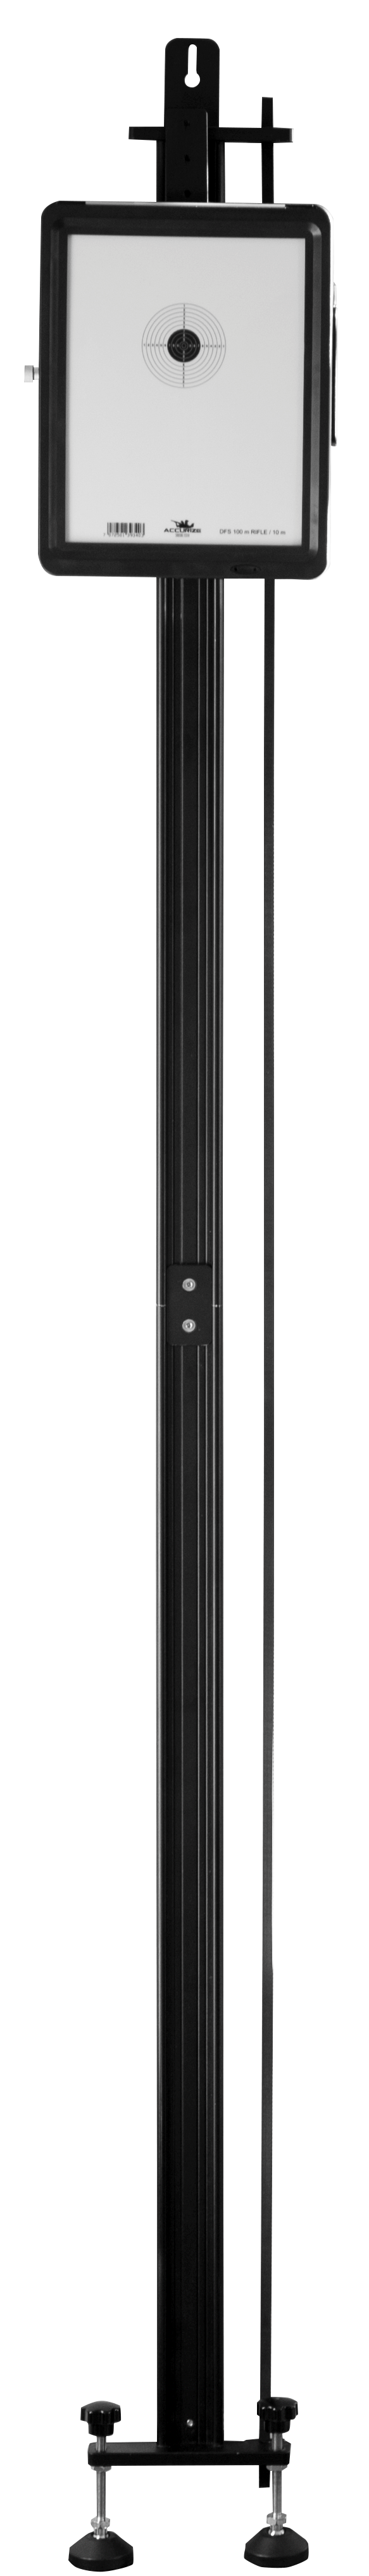 Accurize target lift Image